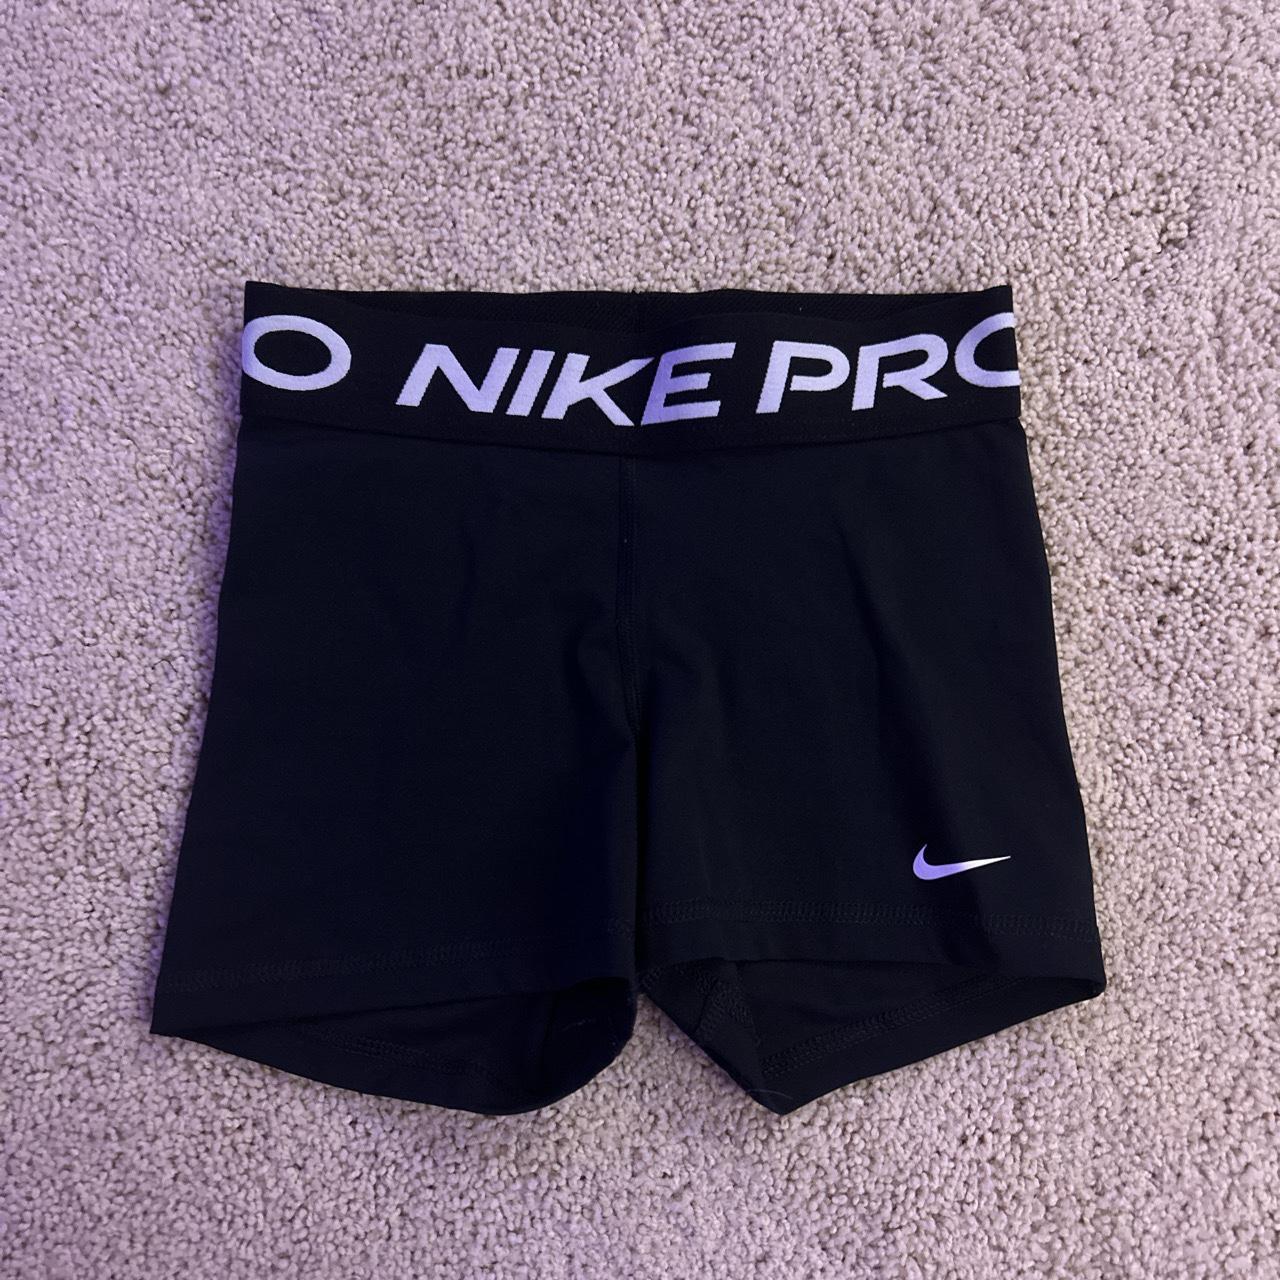 Nike spandex brand new without tag No flaws - Depop